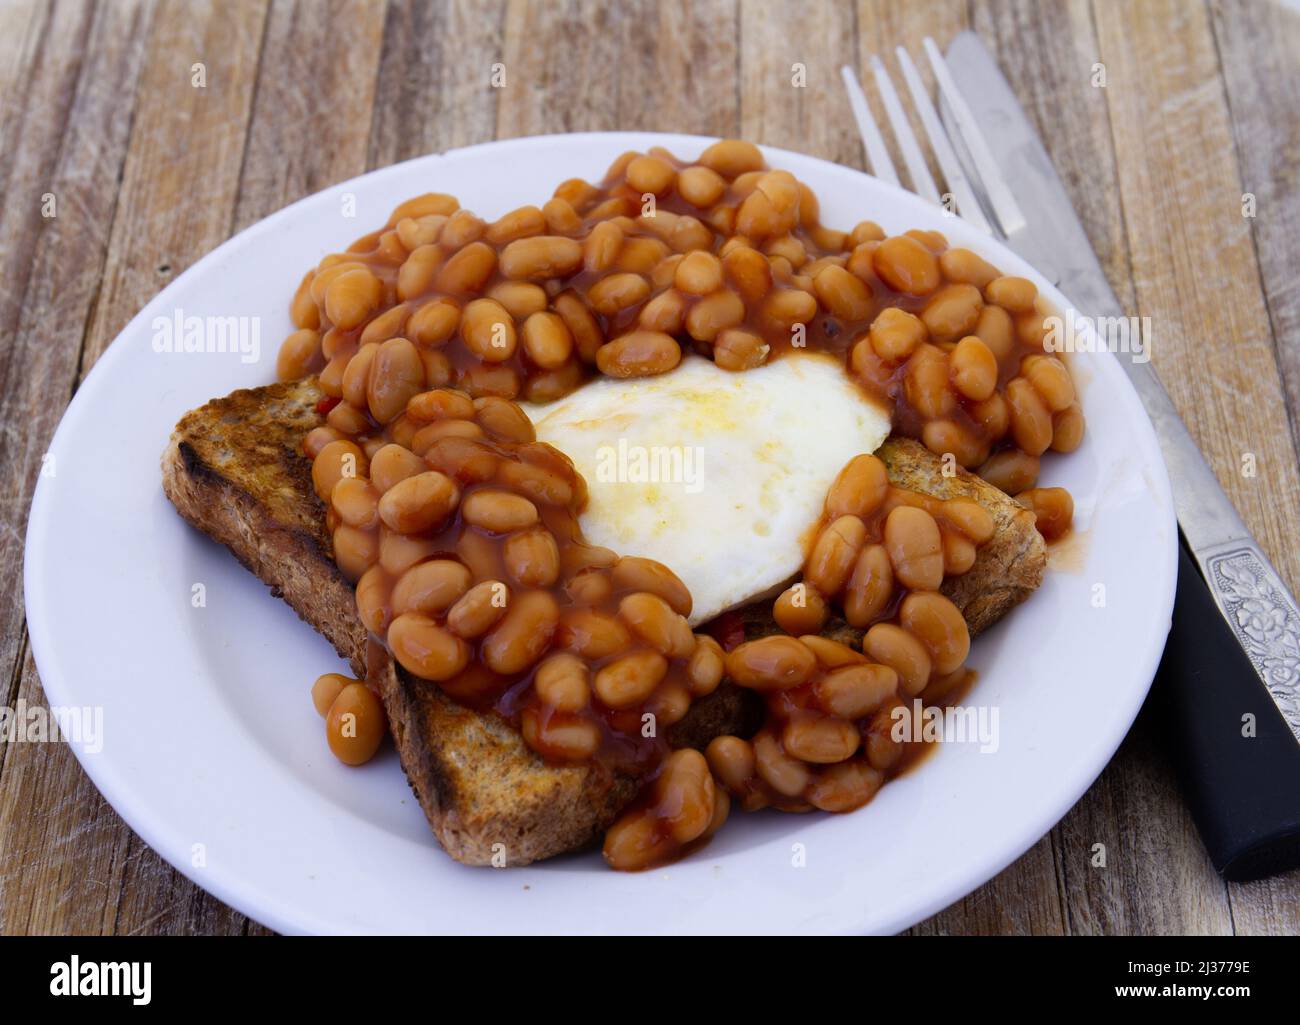 A fried egg and baked beans in tomato sauce on toast Stock Photo